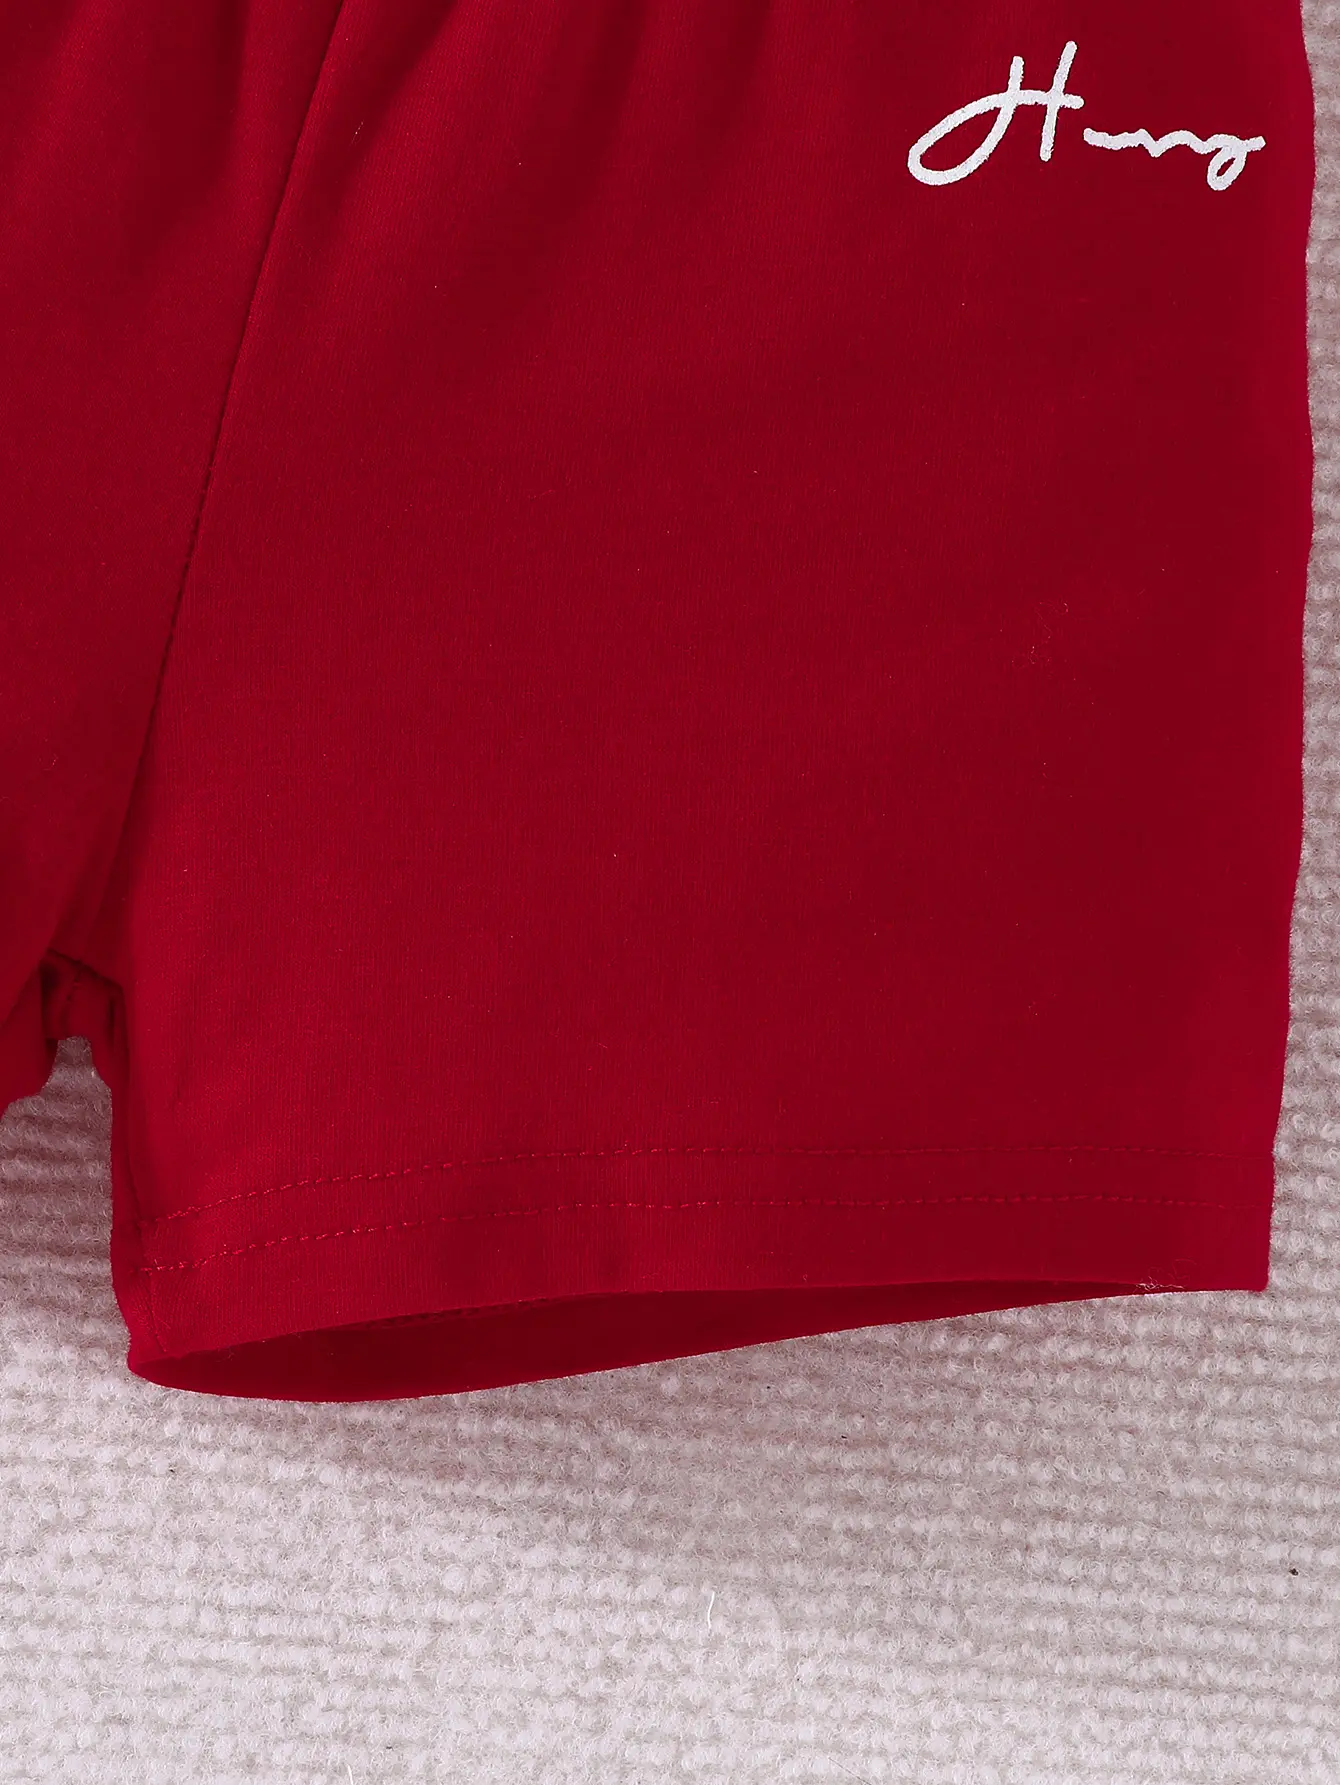 The popular baby and children's red T-shirt and shorts set is made of polyester material which is soft and comfortable